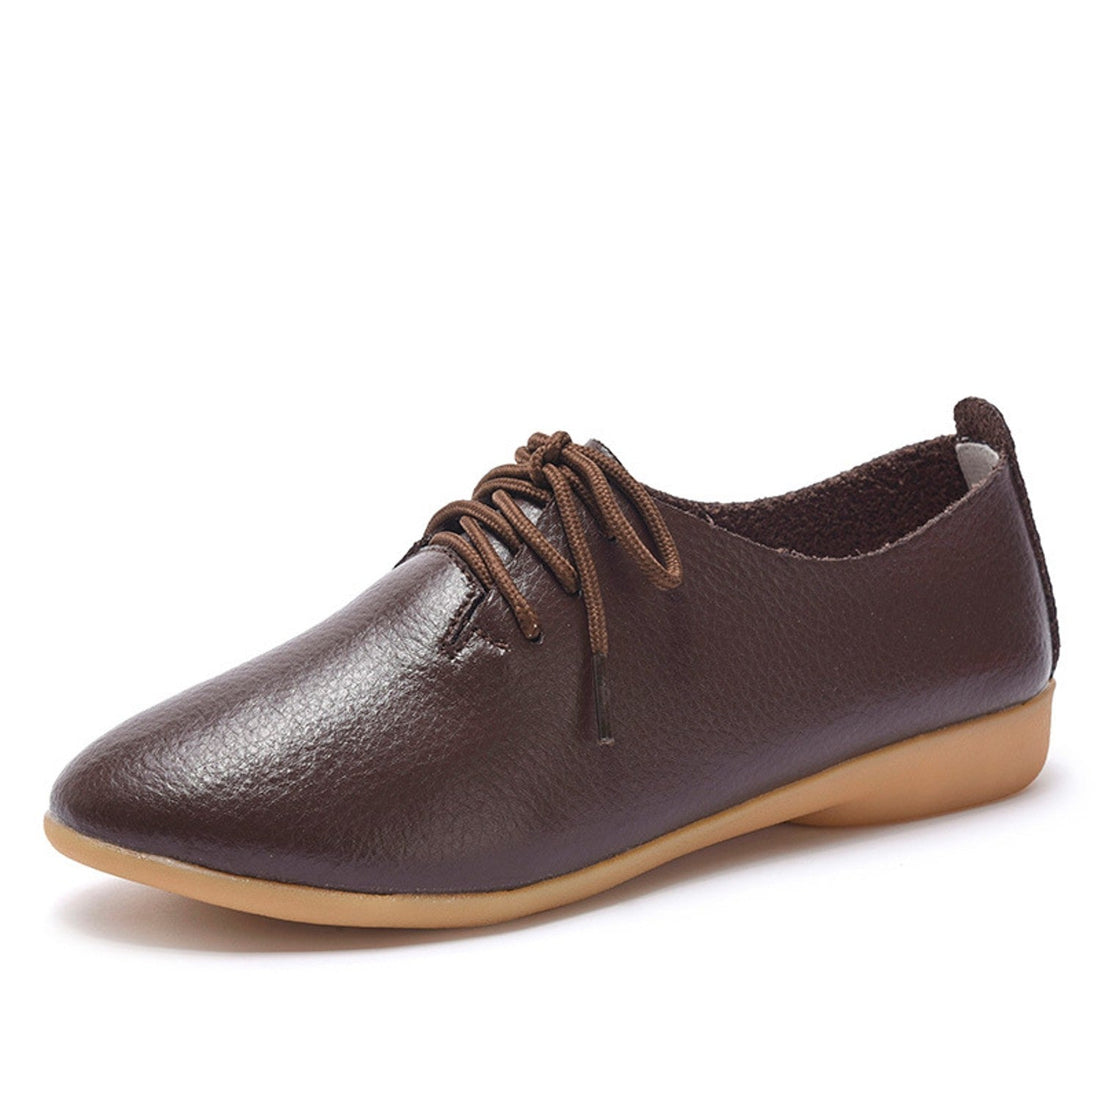 Women's Spring/Autumn Casual Leather Oxfords | Plus Size